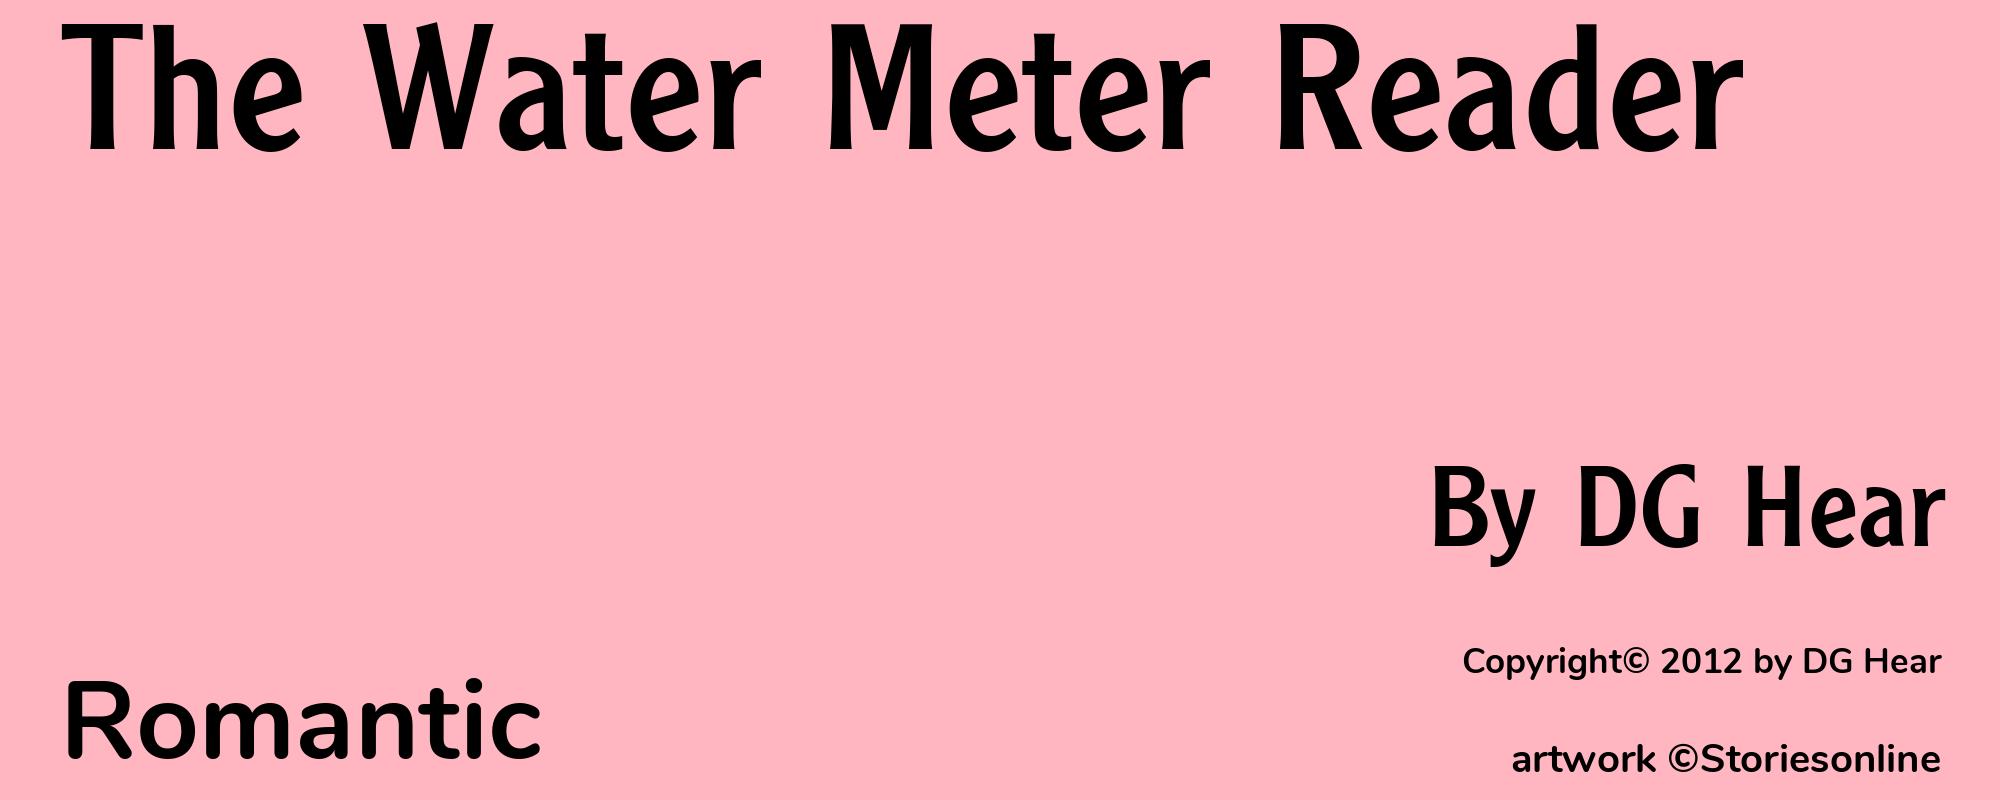 The Water Meter Reader - Cover